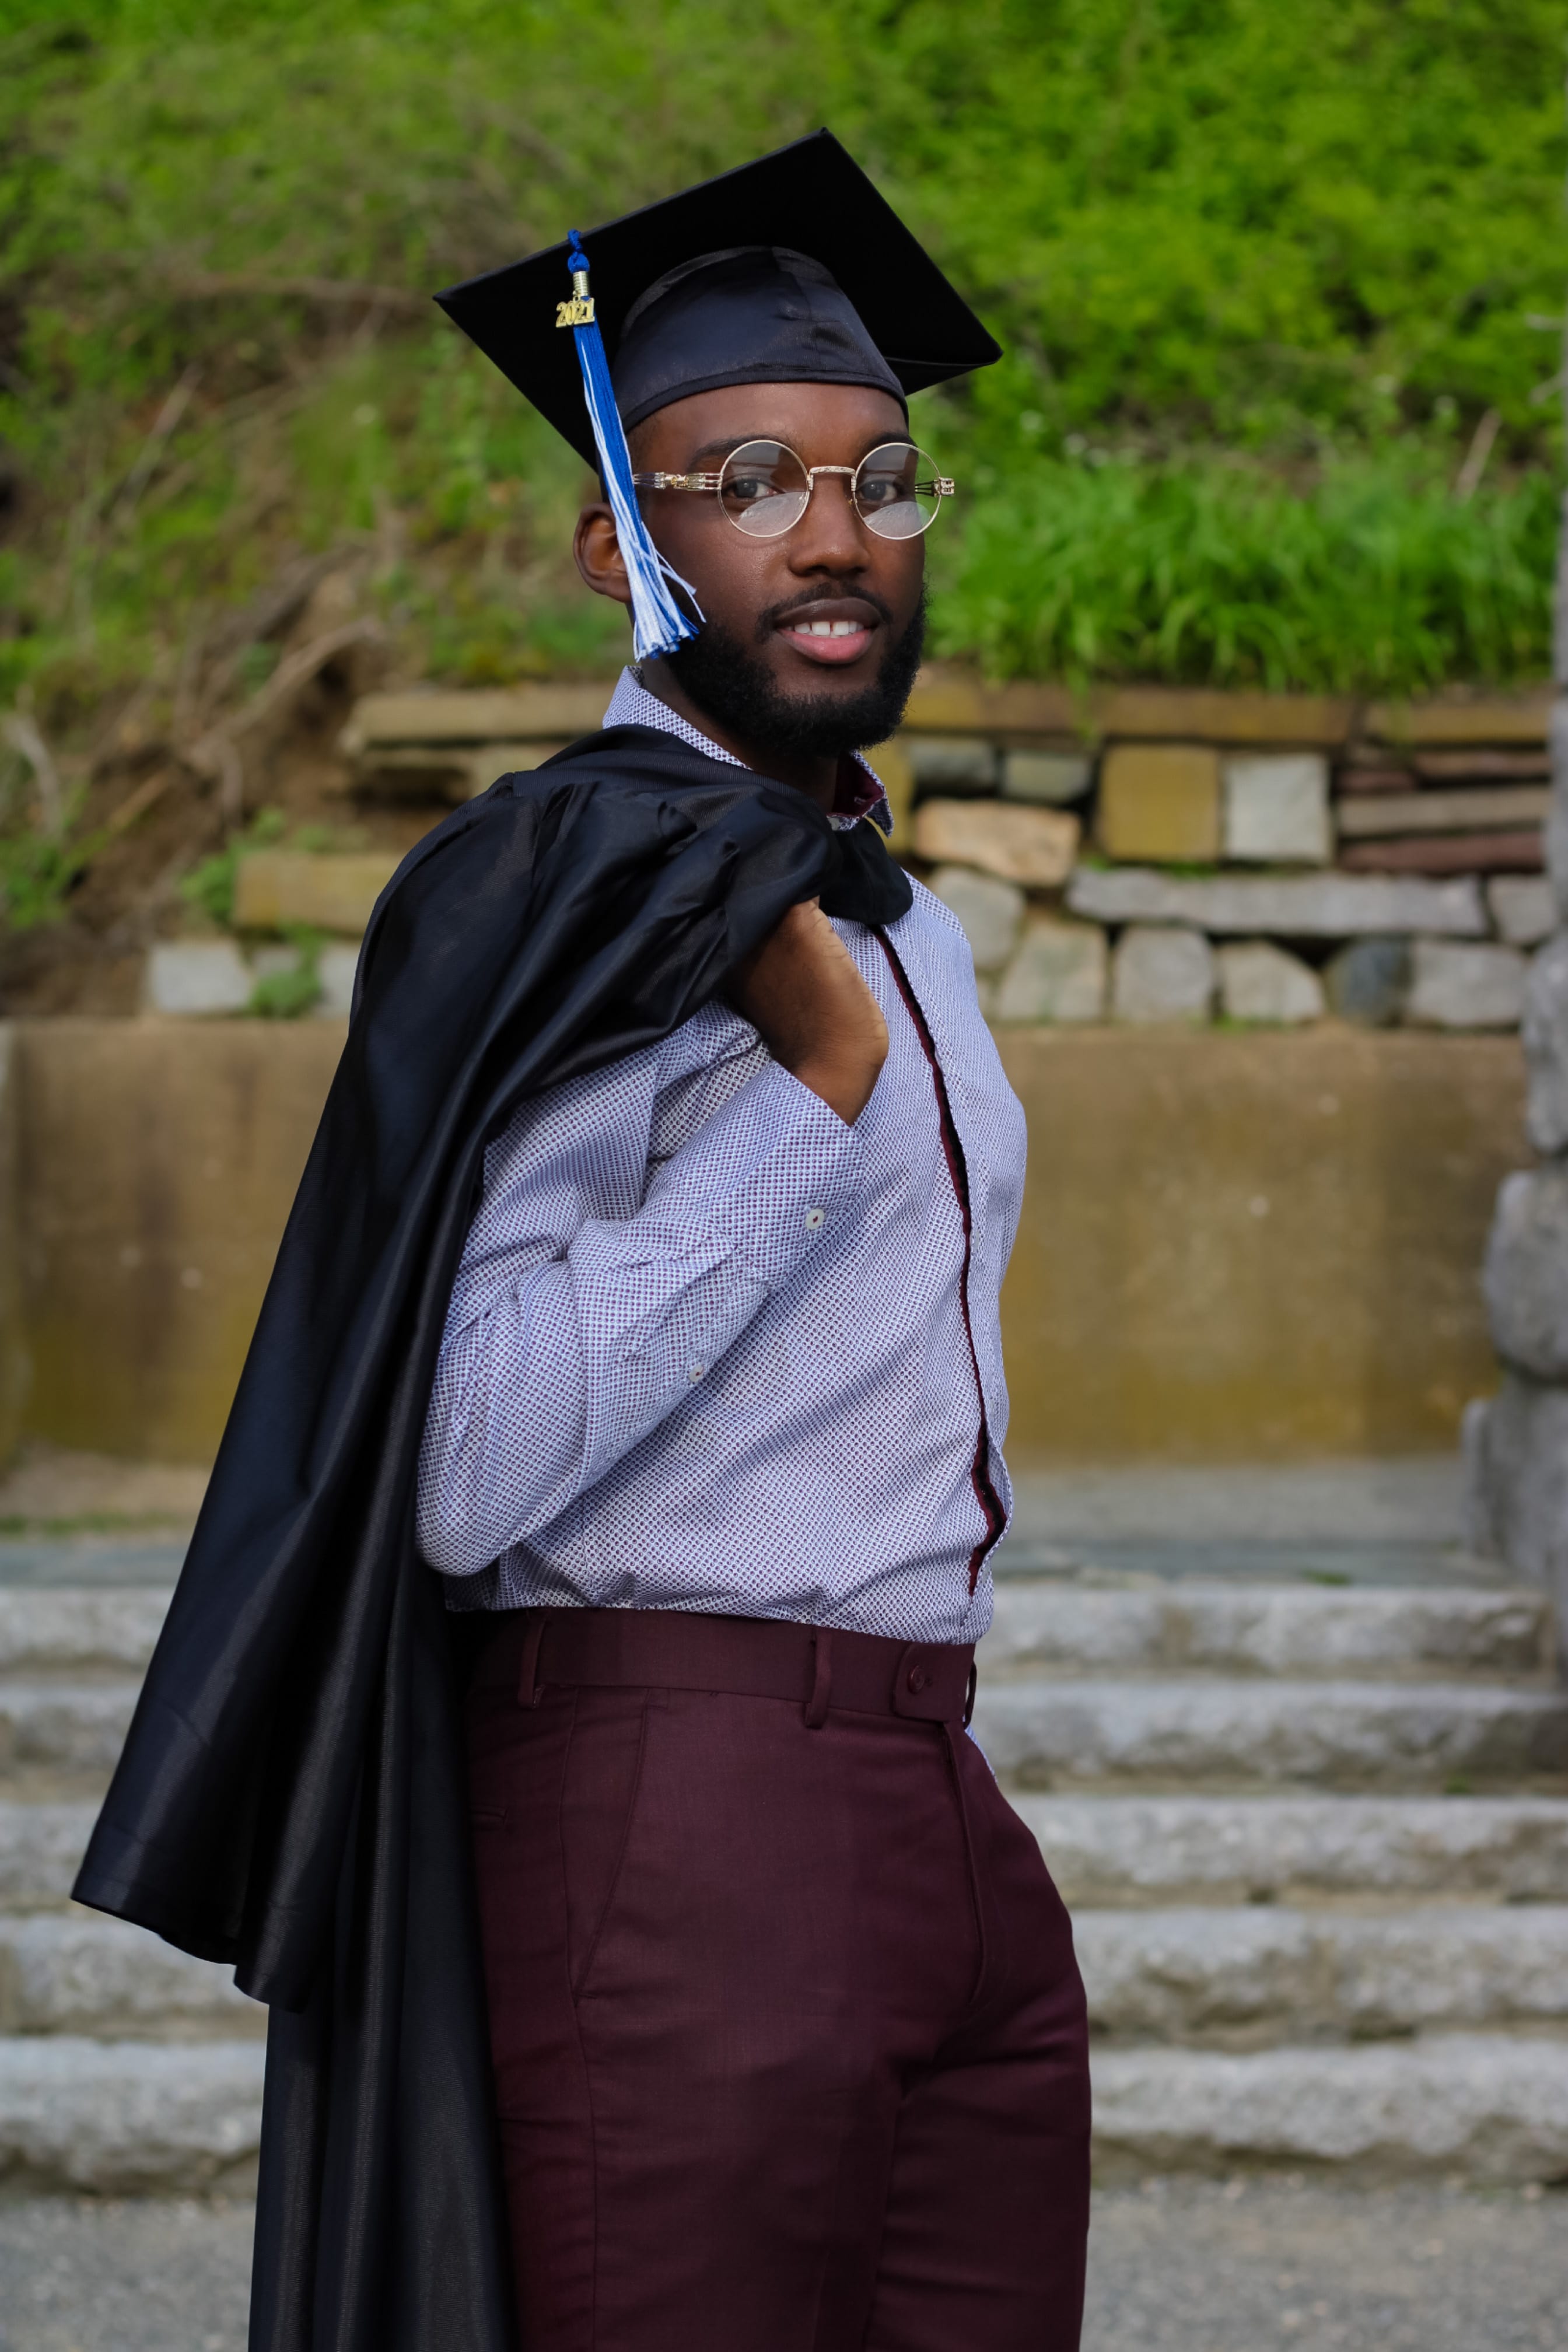 Image of Gaetchino E. Paul, QCC Commencement 2021